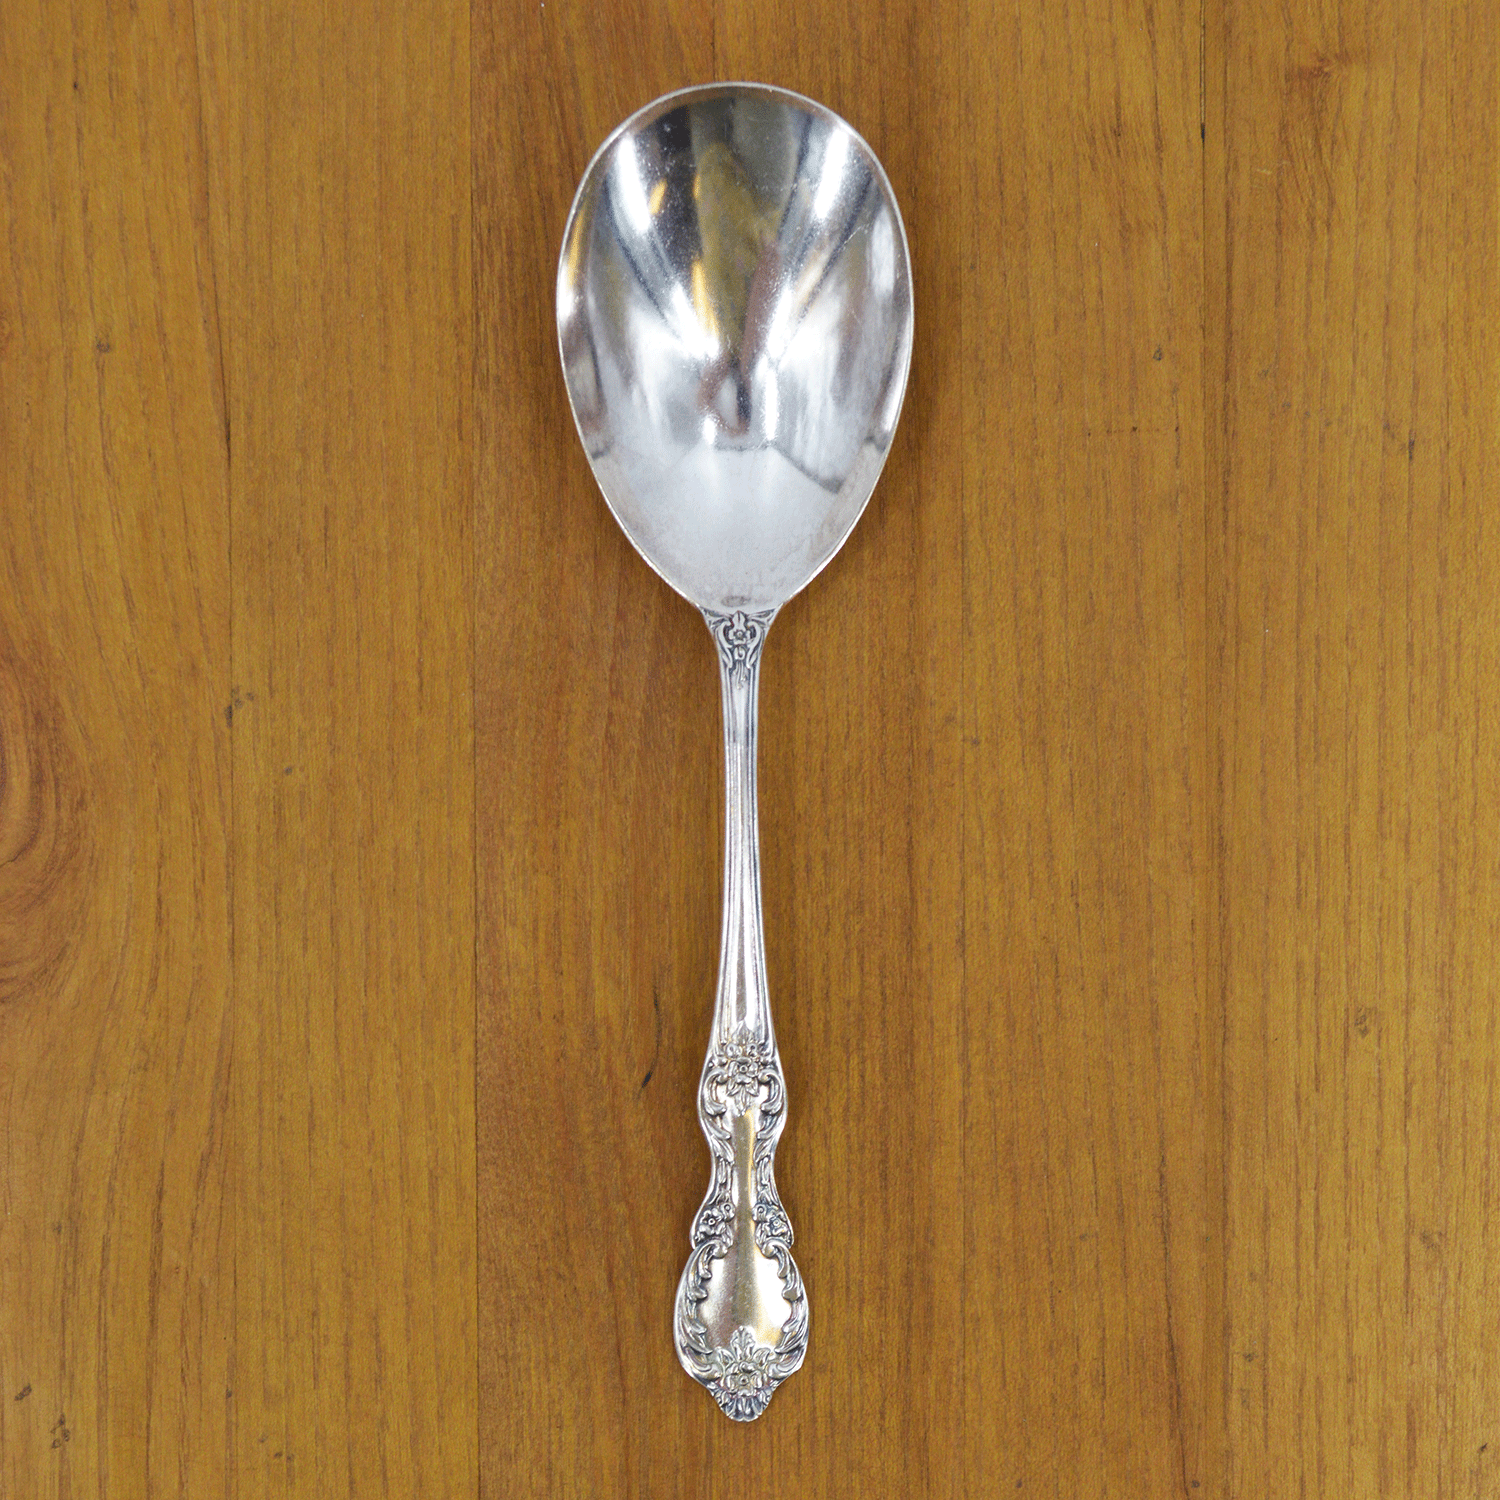 A Hester &amp; Cook Vintage Silver-Plate Berry Spoon on a wooden surface.